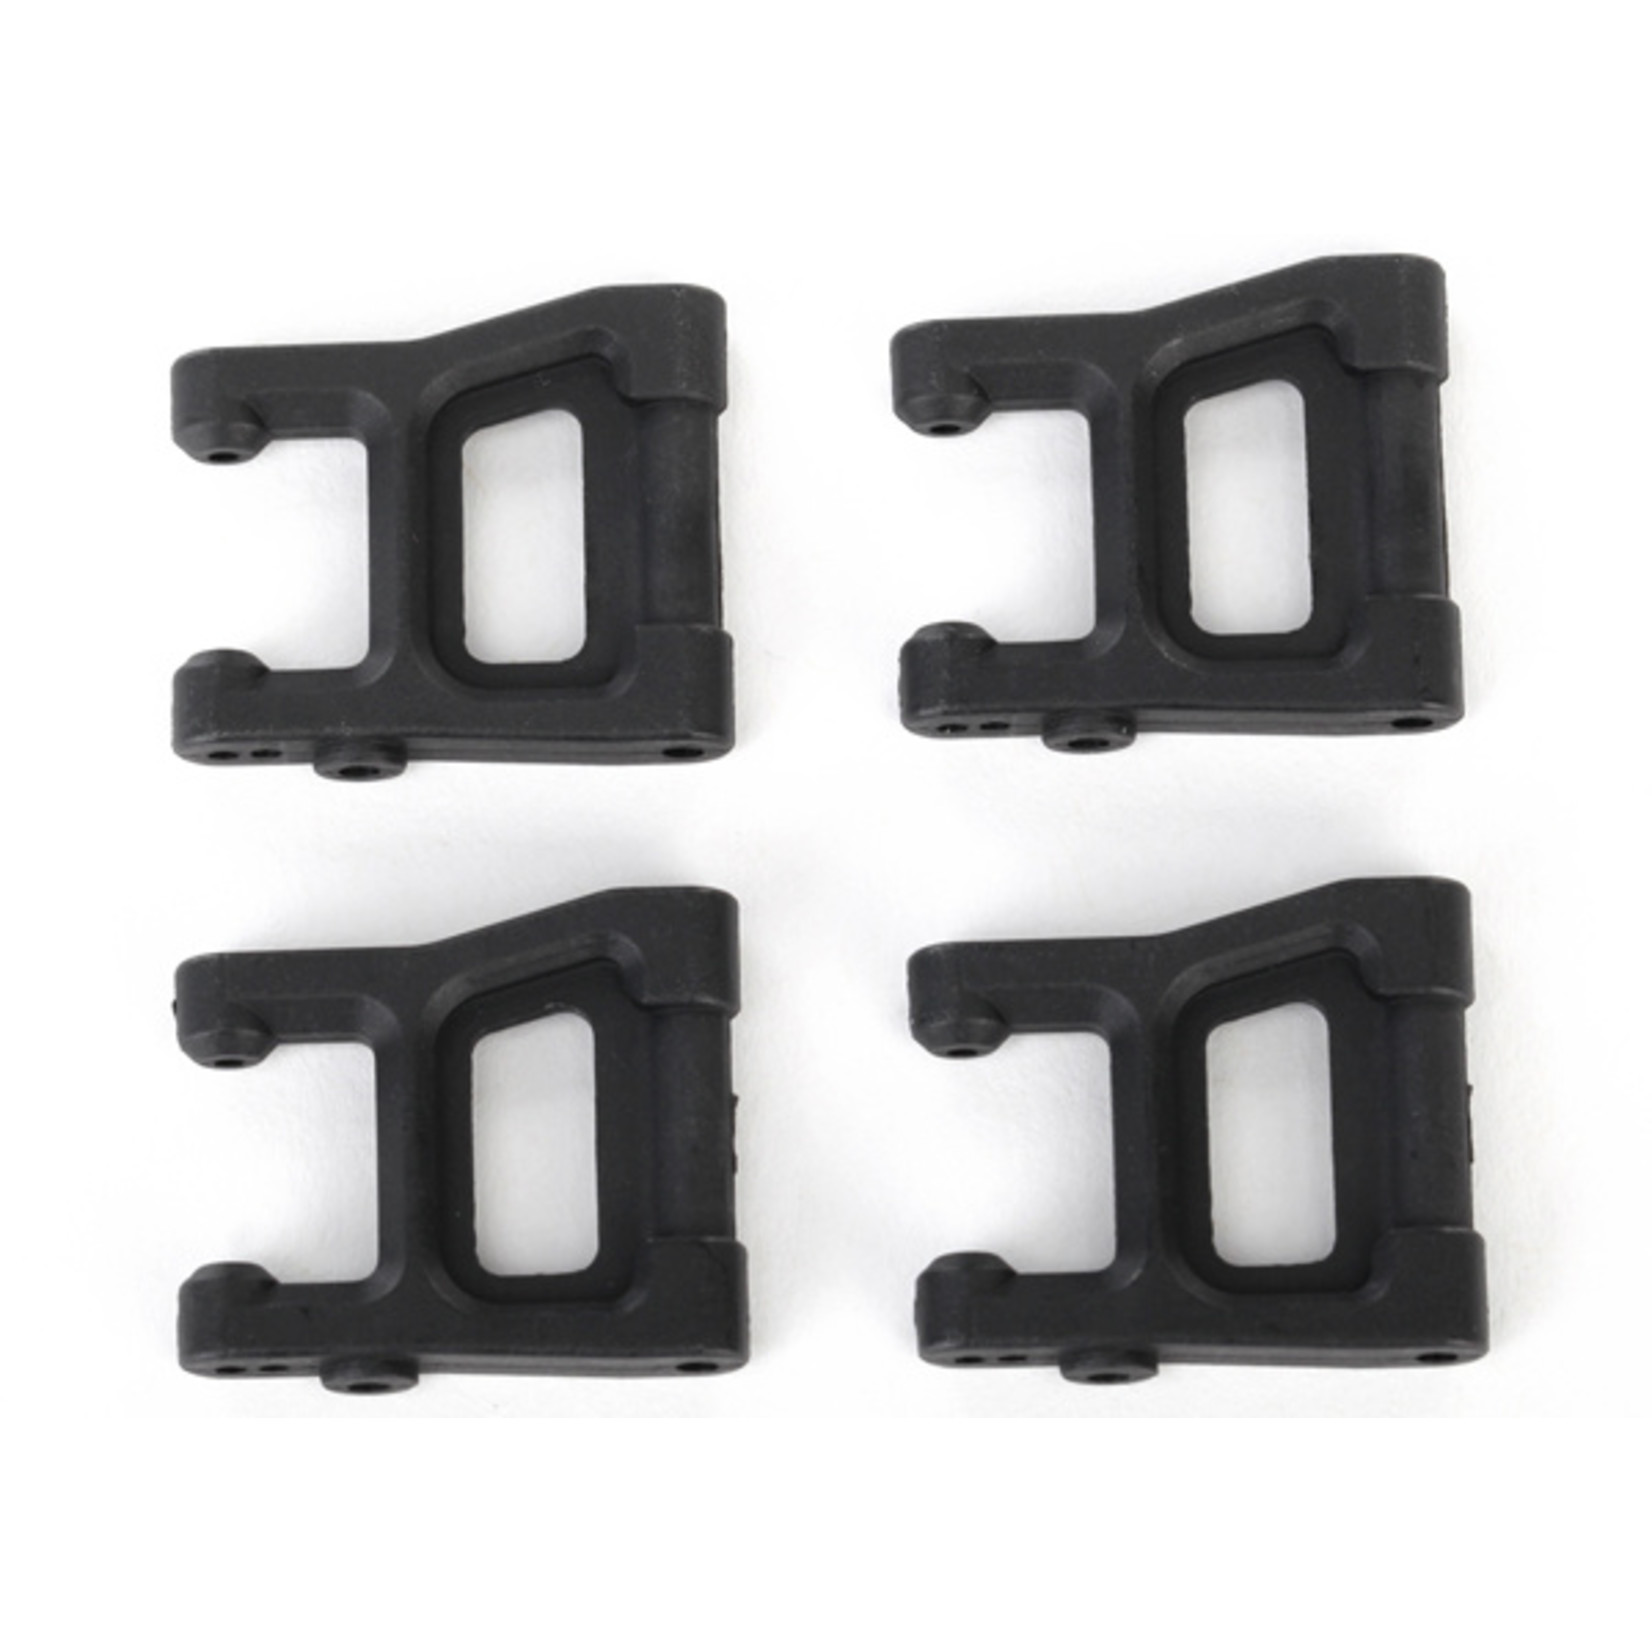 Traxxas 7531 - Suspension arms, front & rear (4)